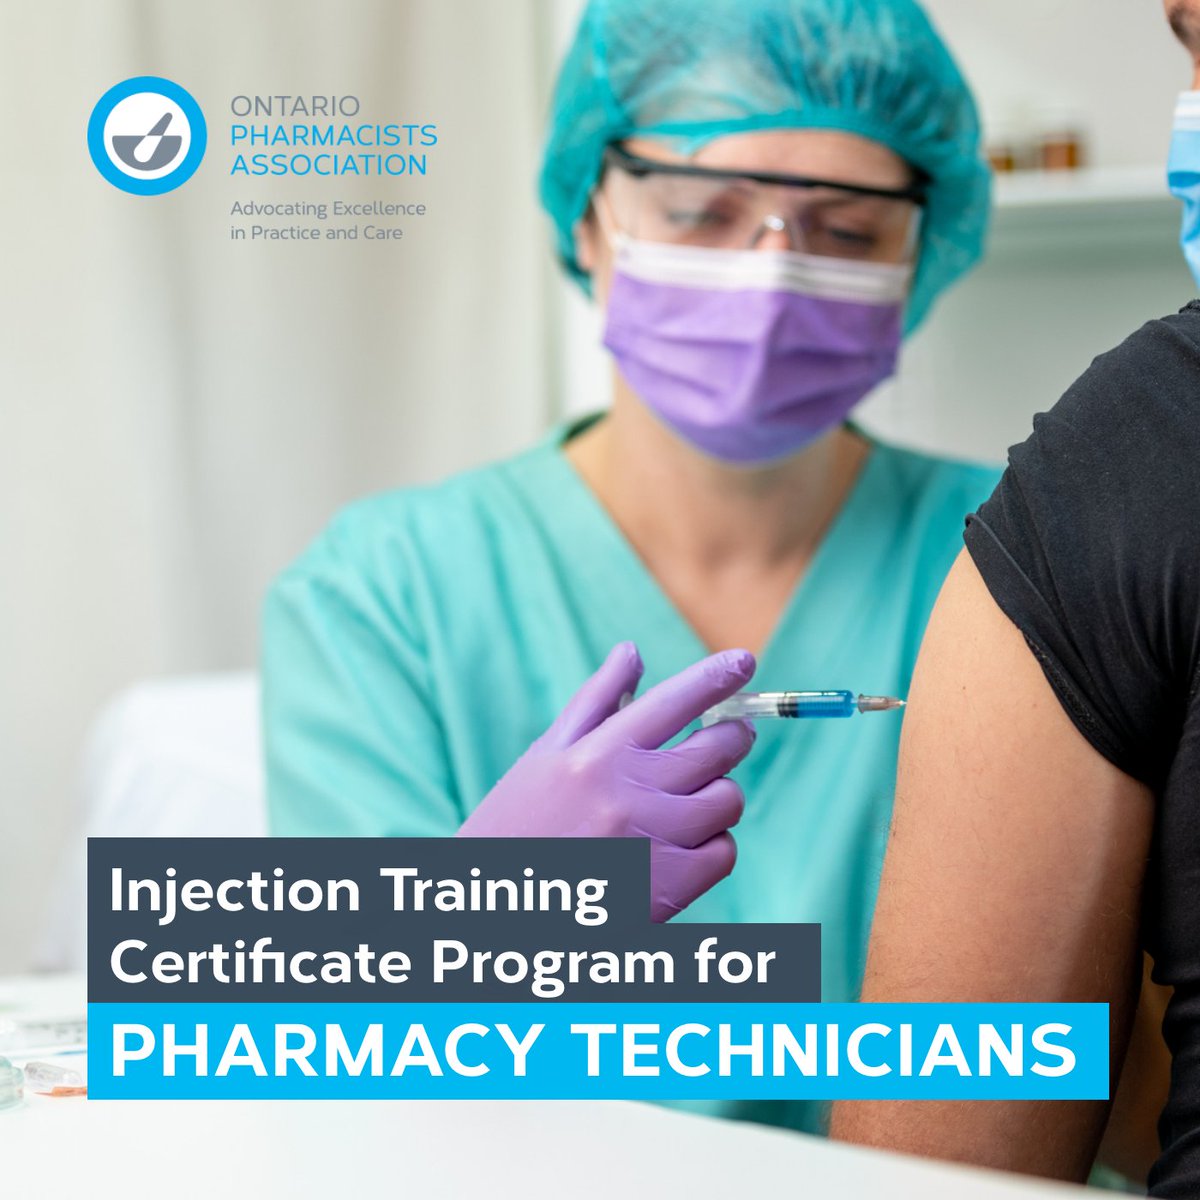 New in-person assessment dates available! Learn how to be proficient in essential immunization techniques and acquire the skills to effectively and safely administer vaccines via injection. This program is recognized by OCP for injection training: ow.ly/C6wm50PFH2I